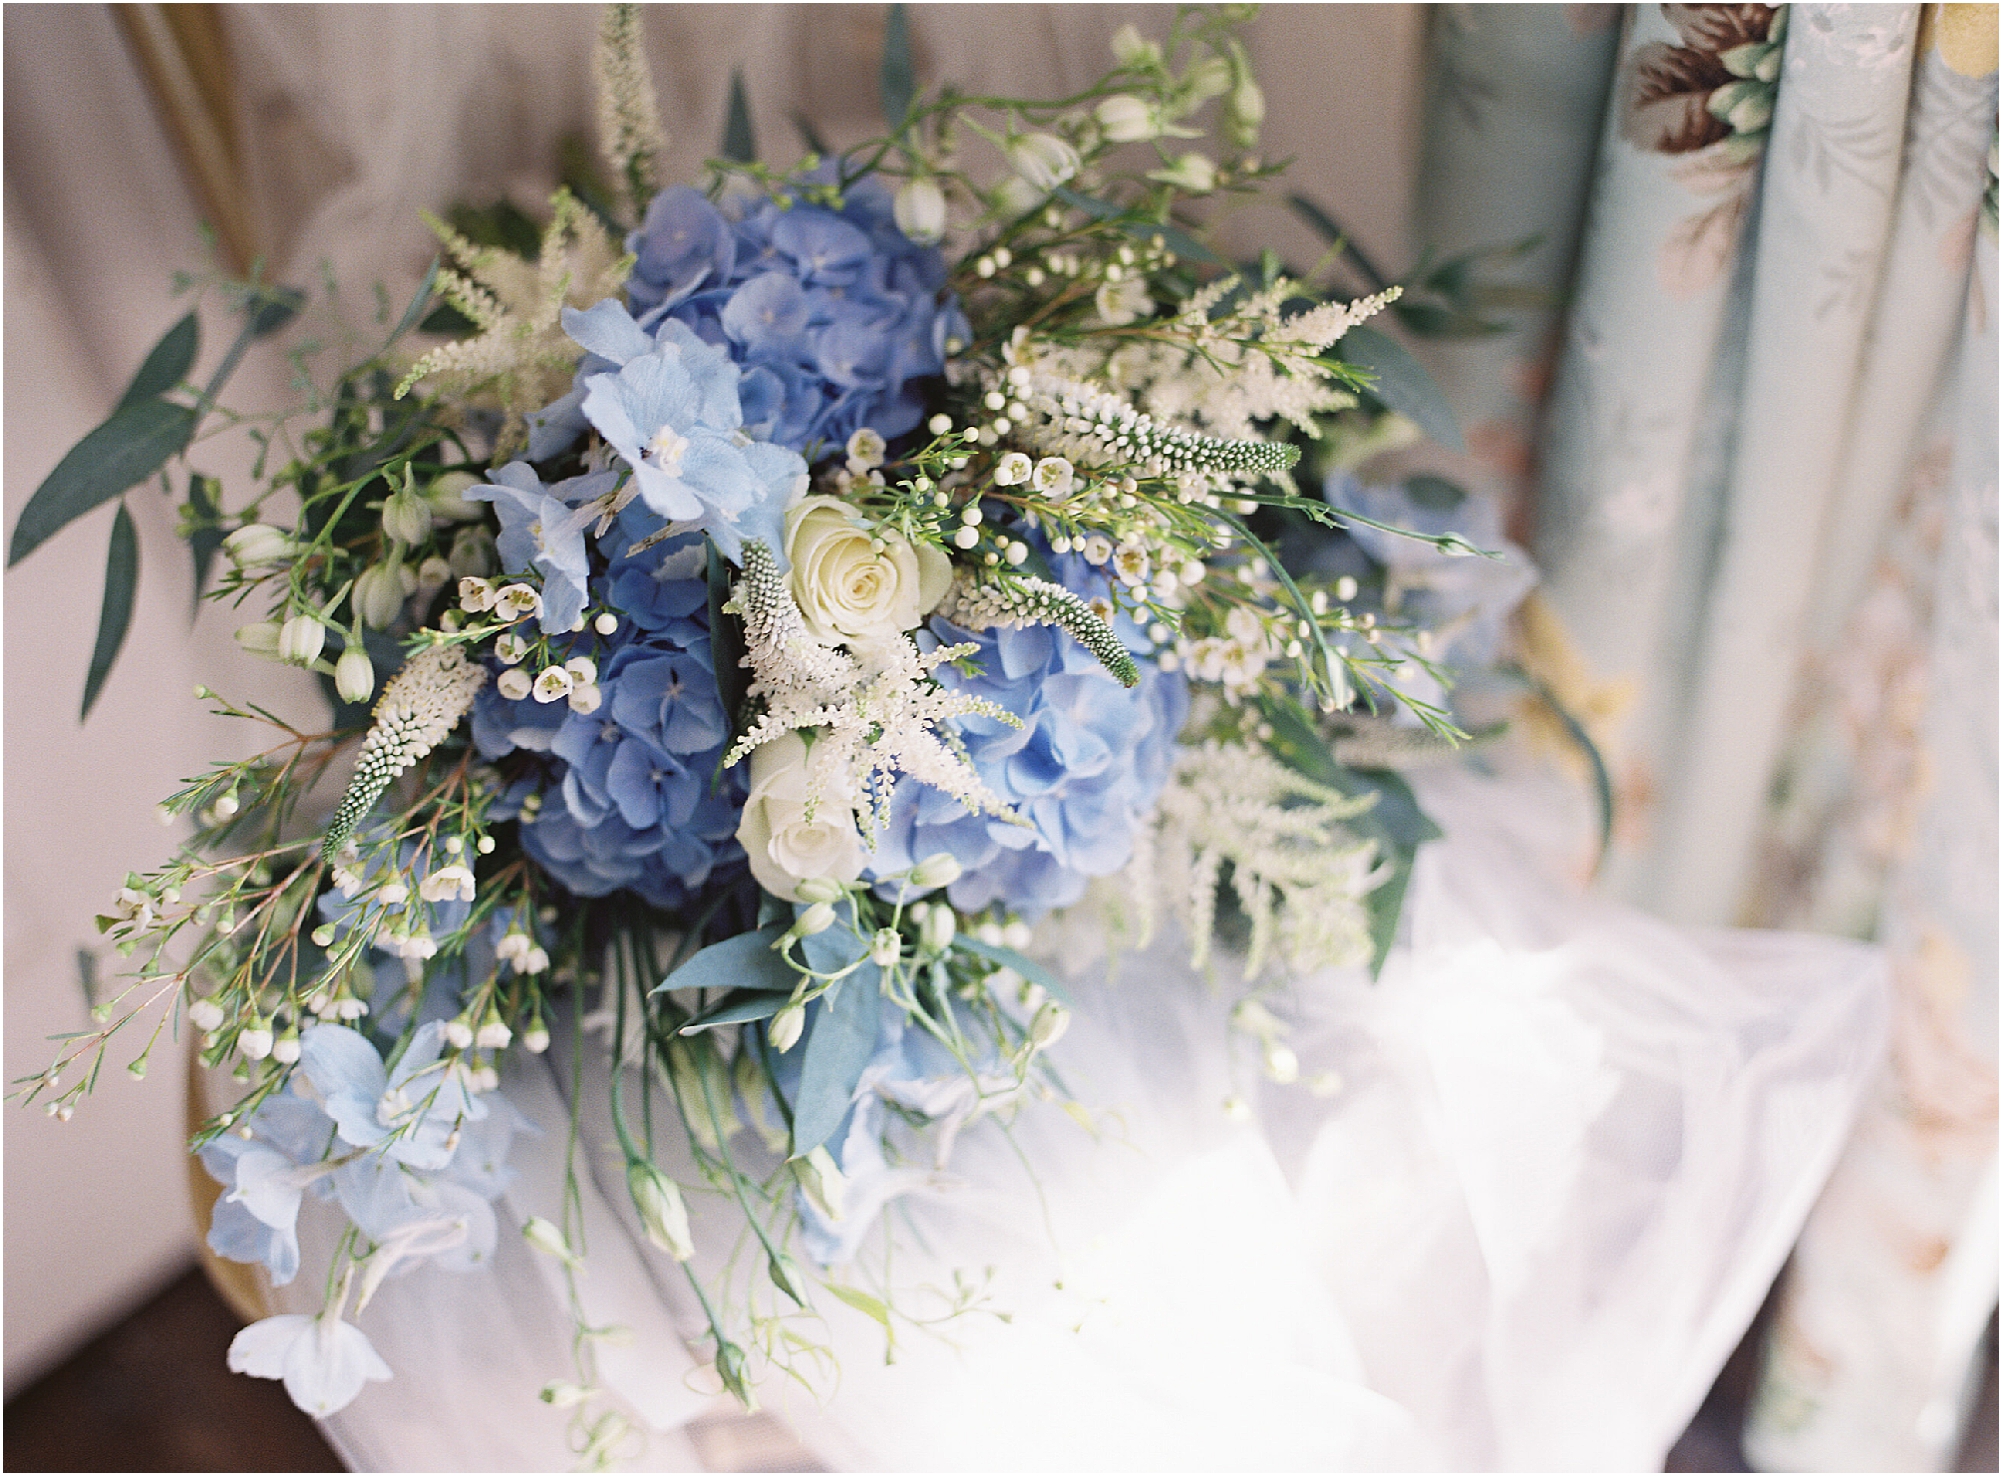 Blue and white bridal bouquet laying on a chair with wedding veil